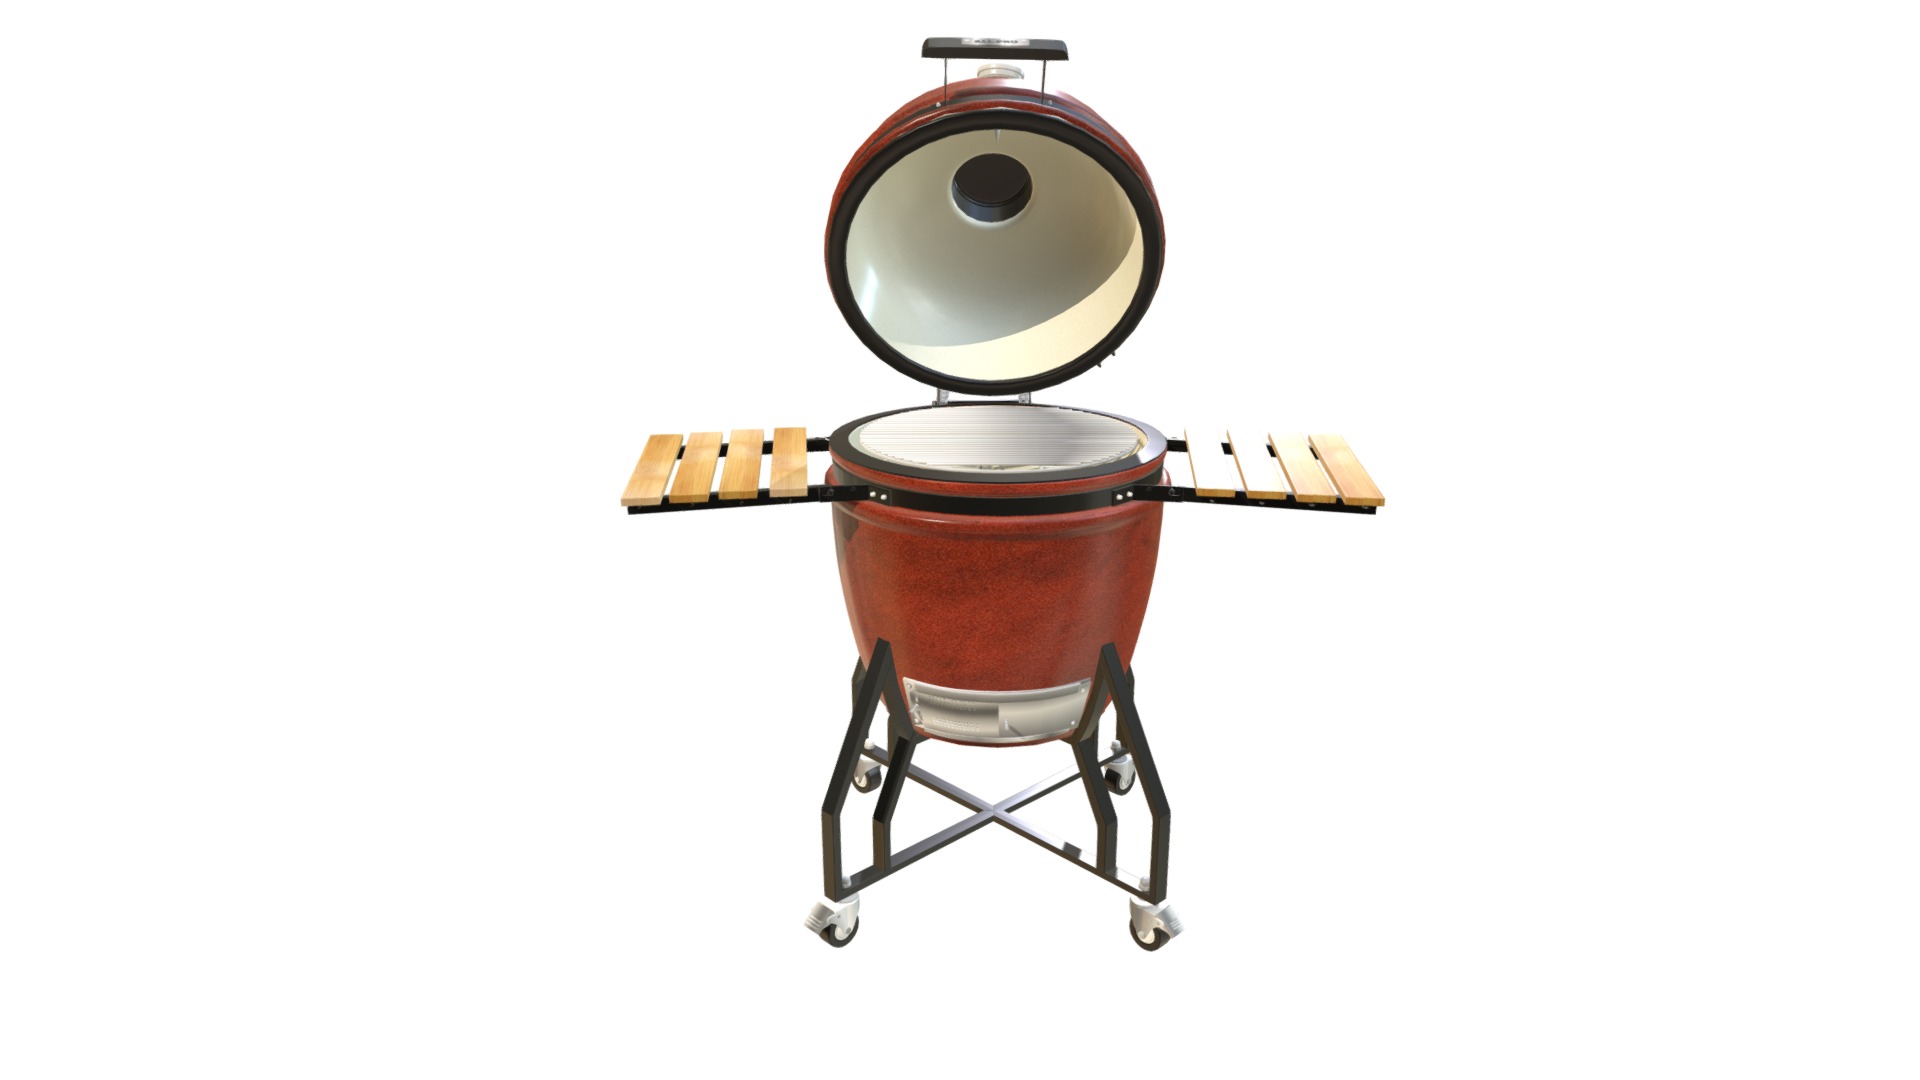 3D model Red Cooker BBQ - This is a 3D model of the Red Cooker BBQ. The 3D model is about a barbecue grill with a wood lid.